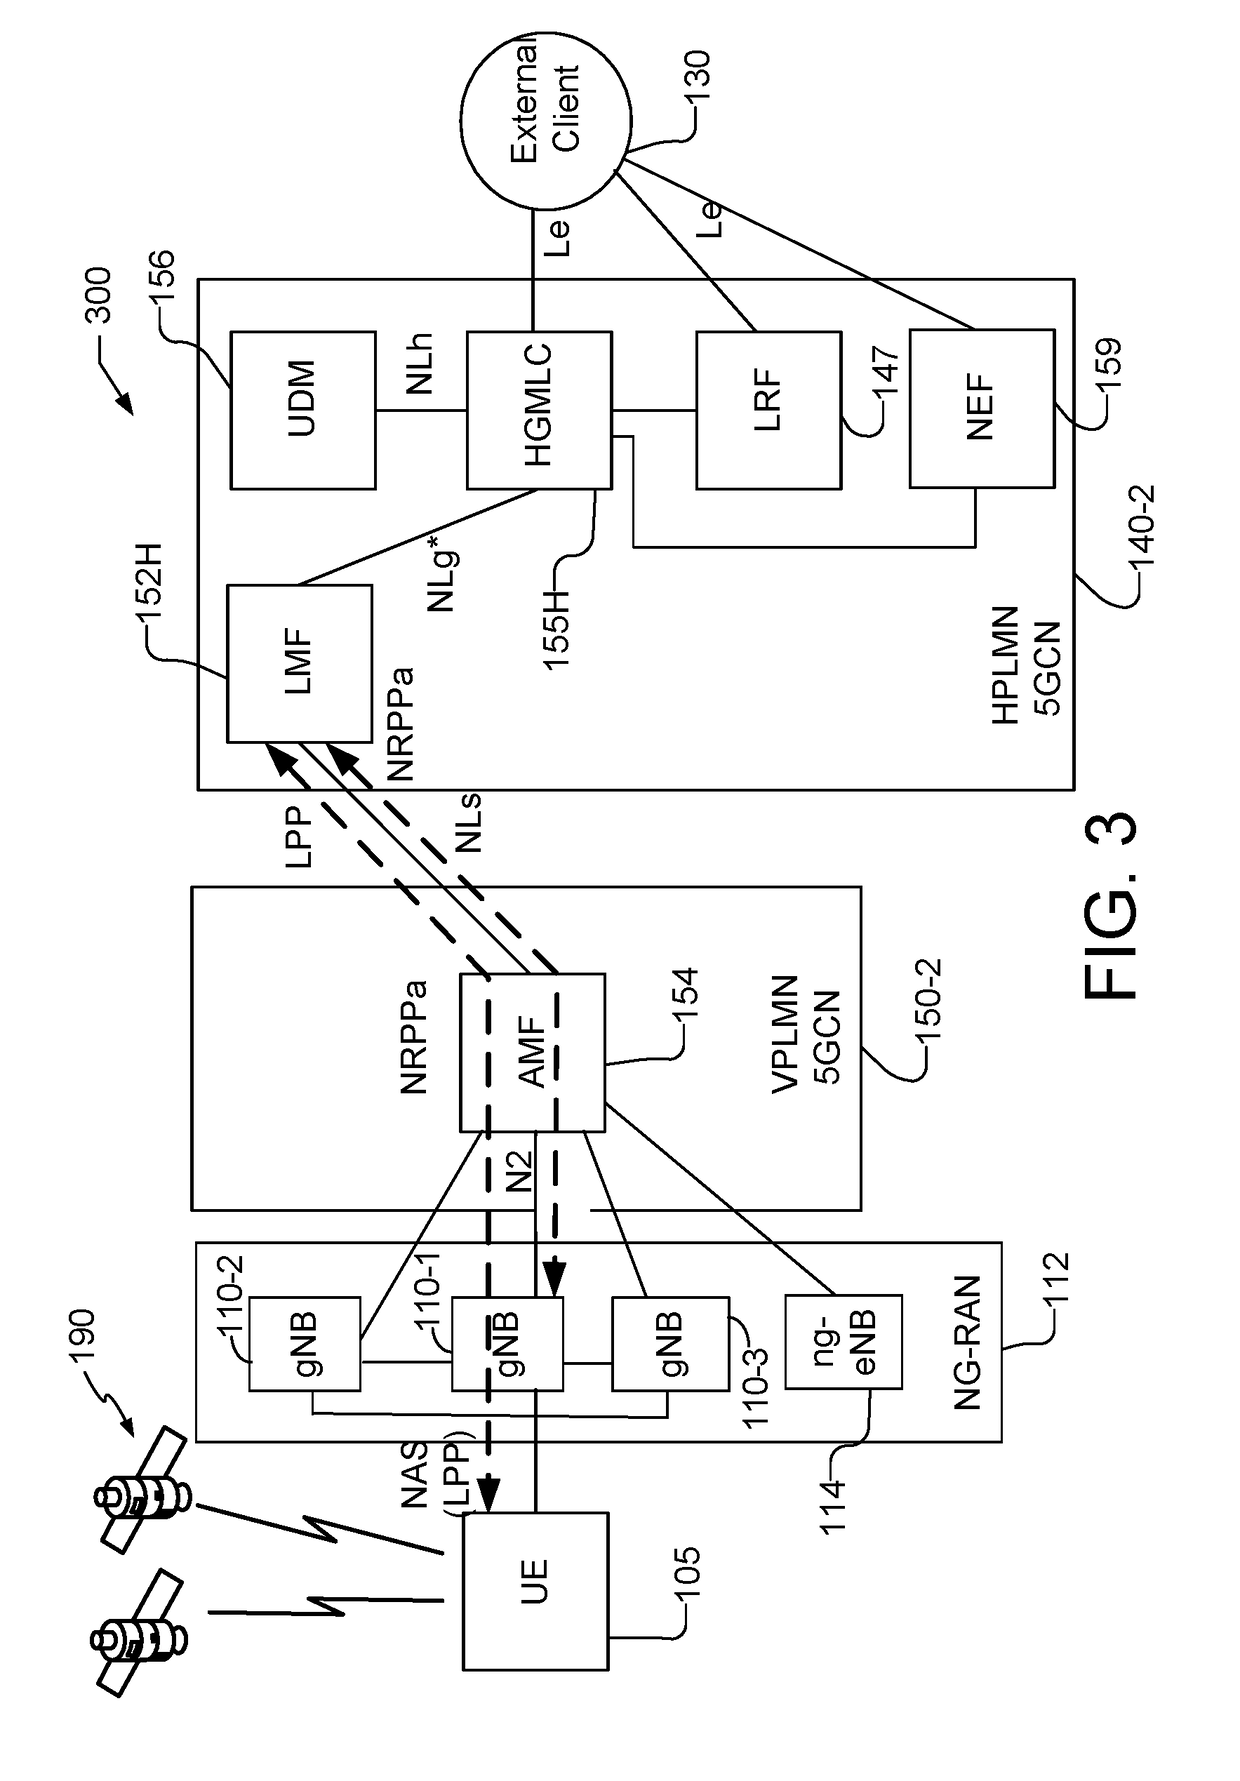 Systems and methods for 5g location support using service based interfaces